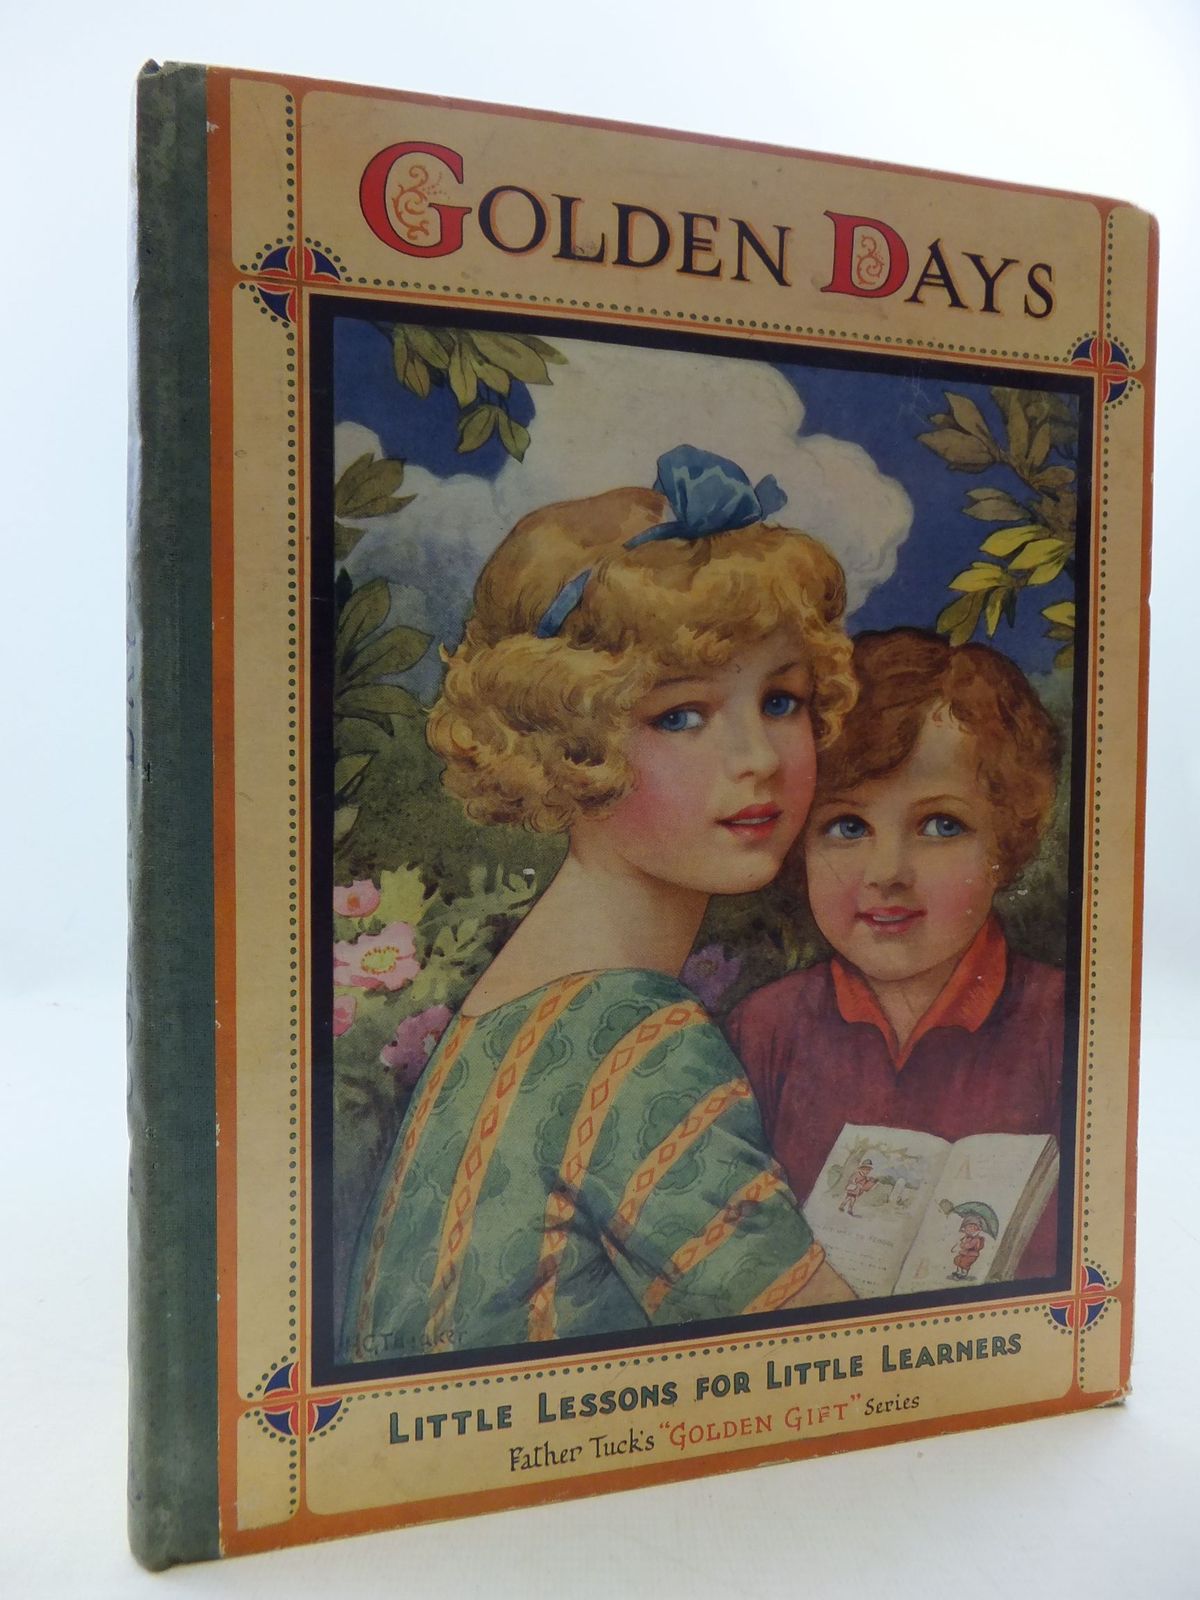 Stella & Rose's Books : GOLDEN DAYS LITTLE LESSONS FOR LITTLE LEARNERS ...